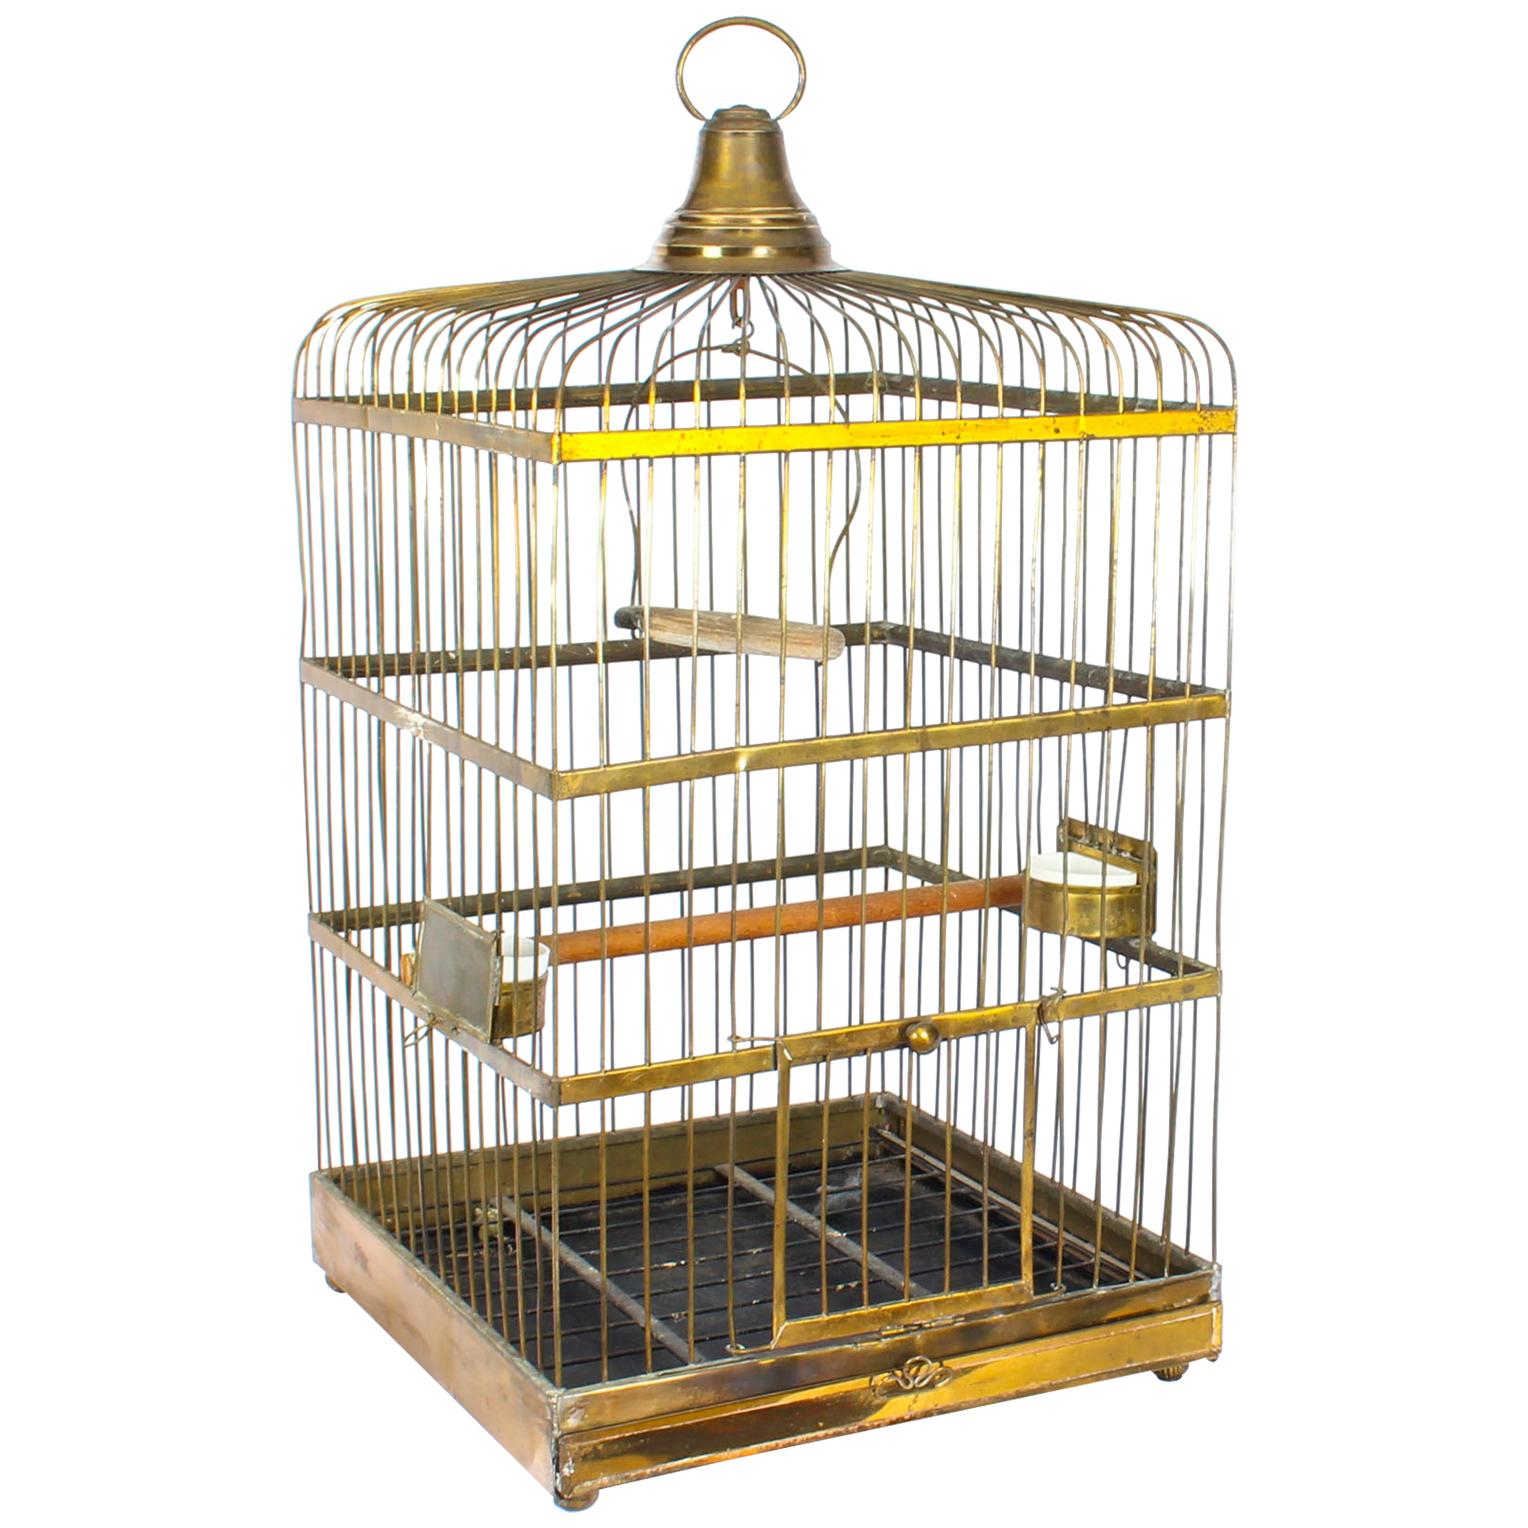 Antique Victorian French Brass Parrot's Cage Bird Cage, 19th Century